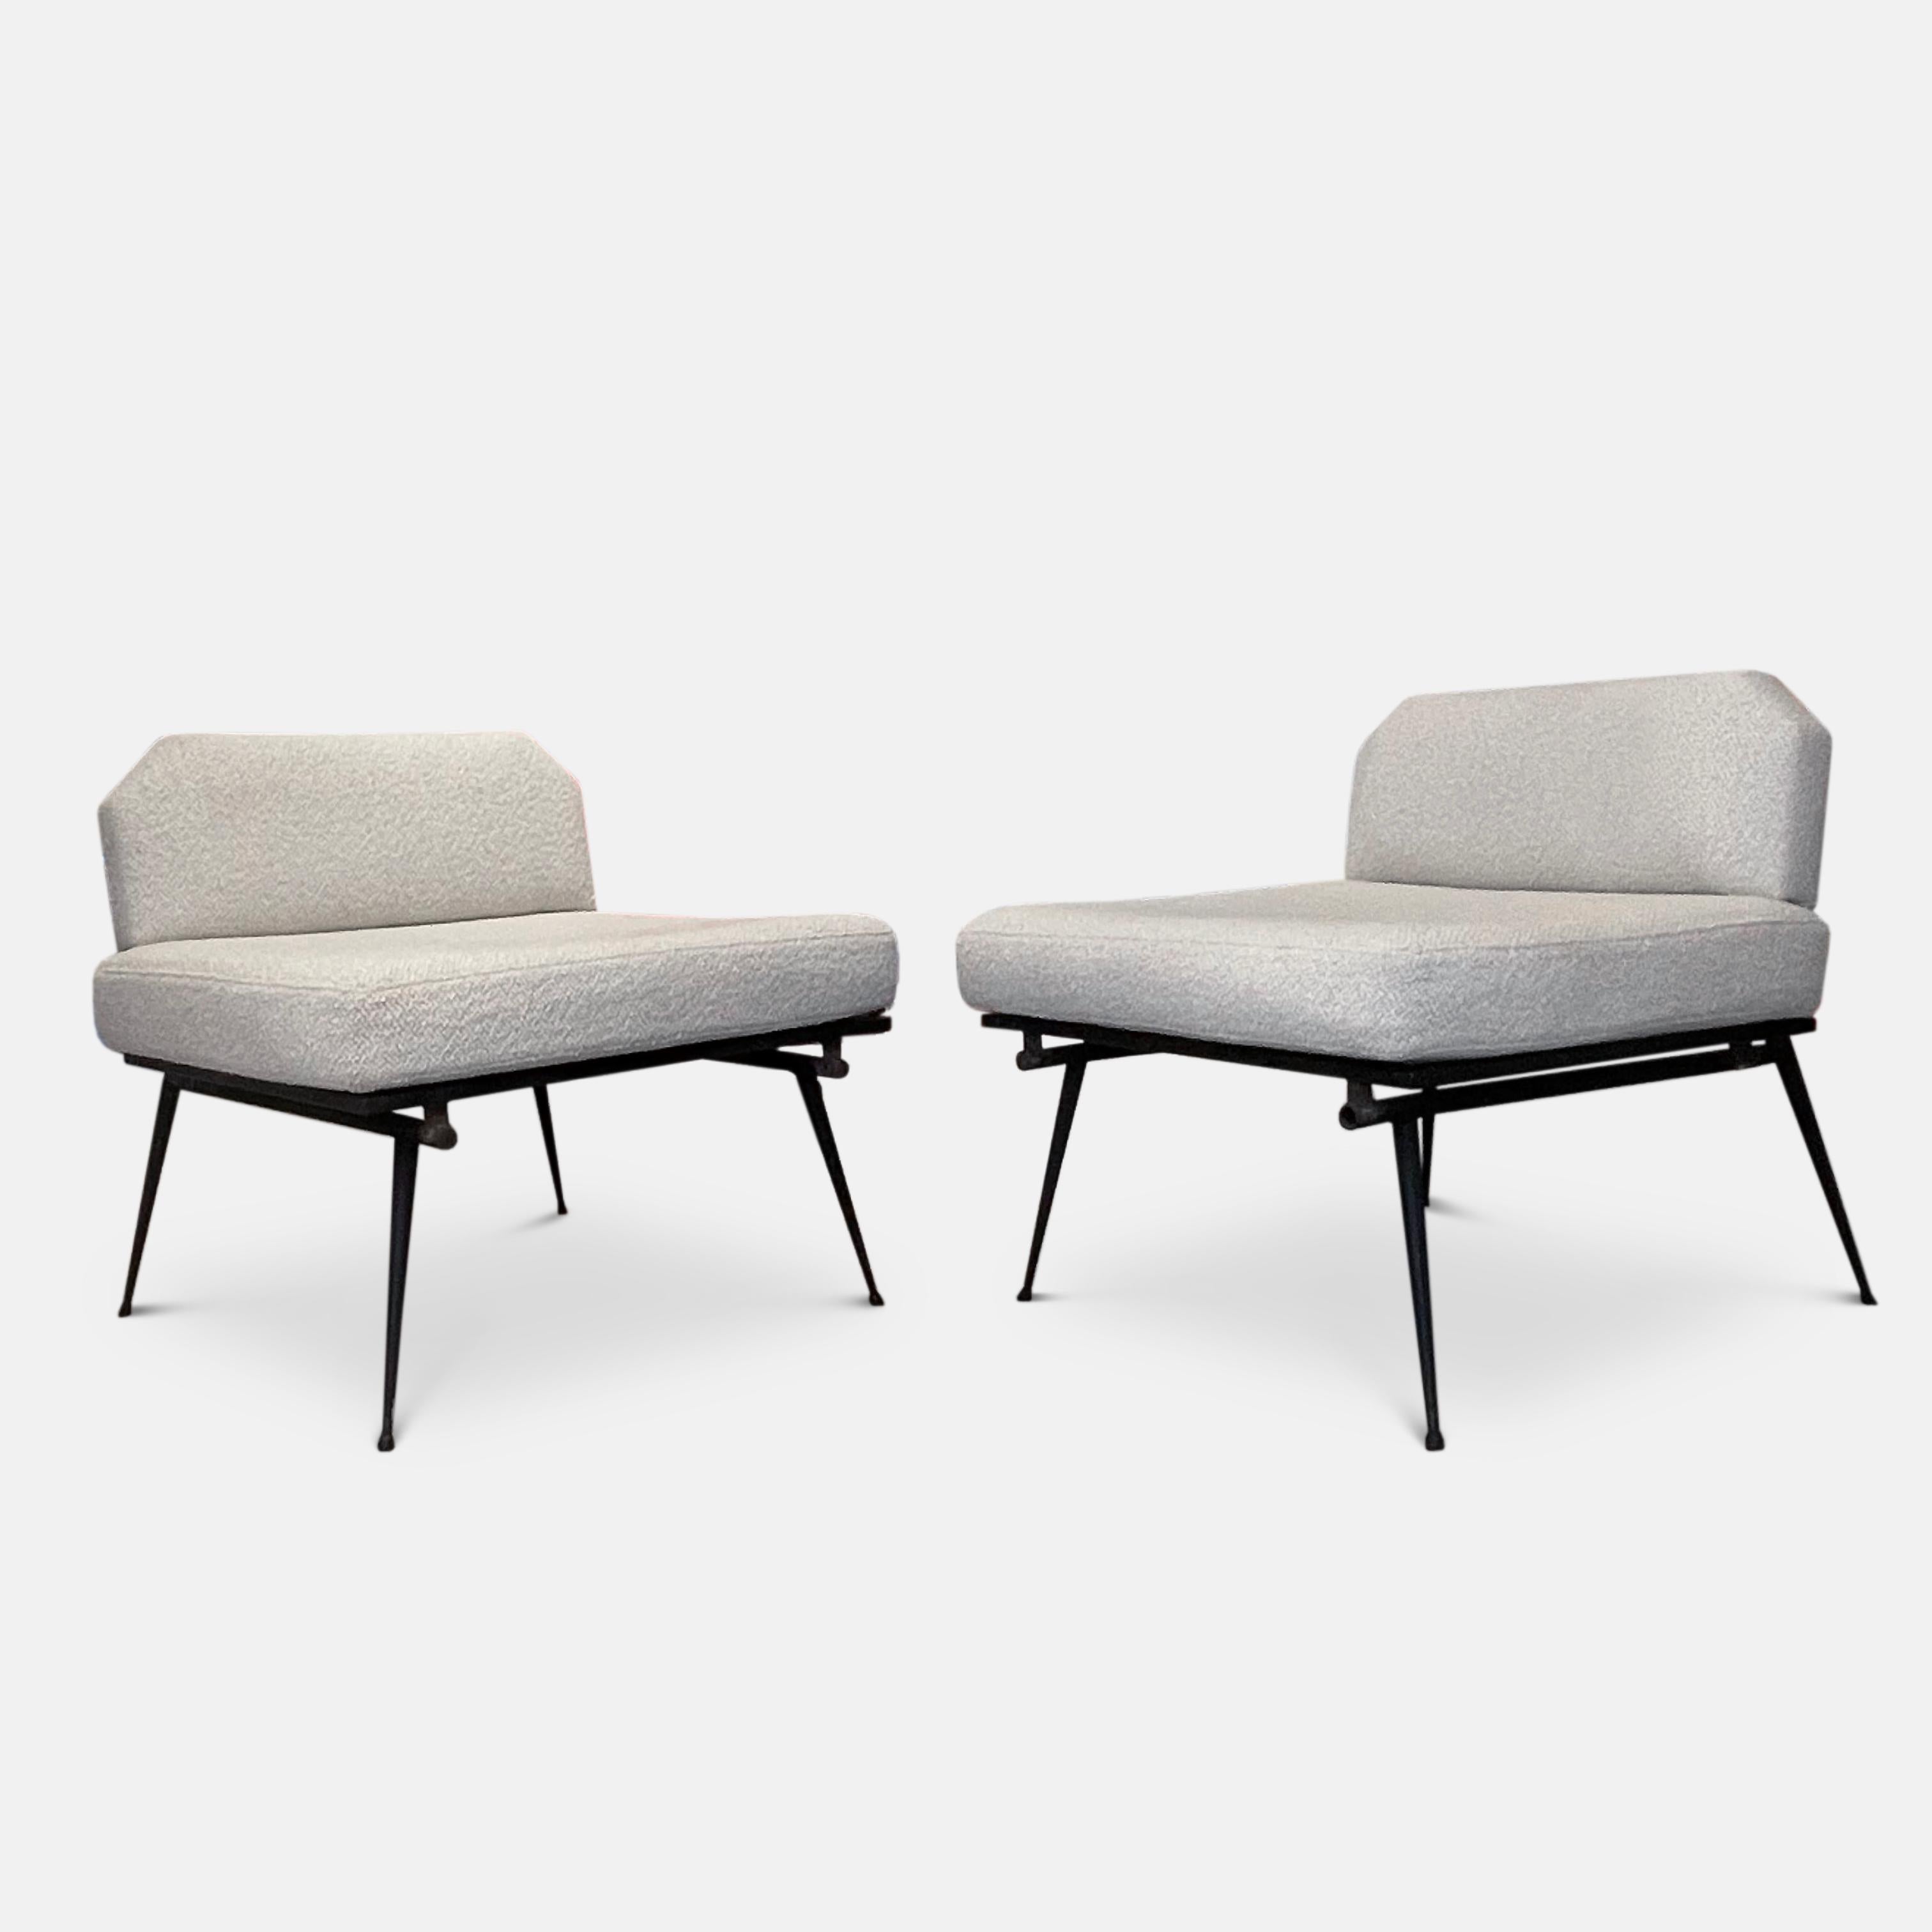 A stunning pair of Italian 1950s low lounge chairs in the manner of Studio bbpr. 
Constructed on a minimal metal base with splayed tapering legs and decoratively angled back supports, this pair of chairs has been newly upholstered in a Dedar Boucle